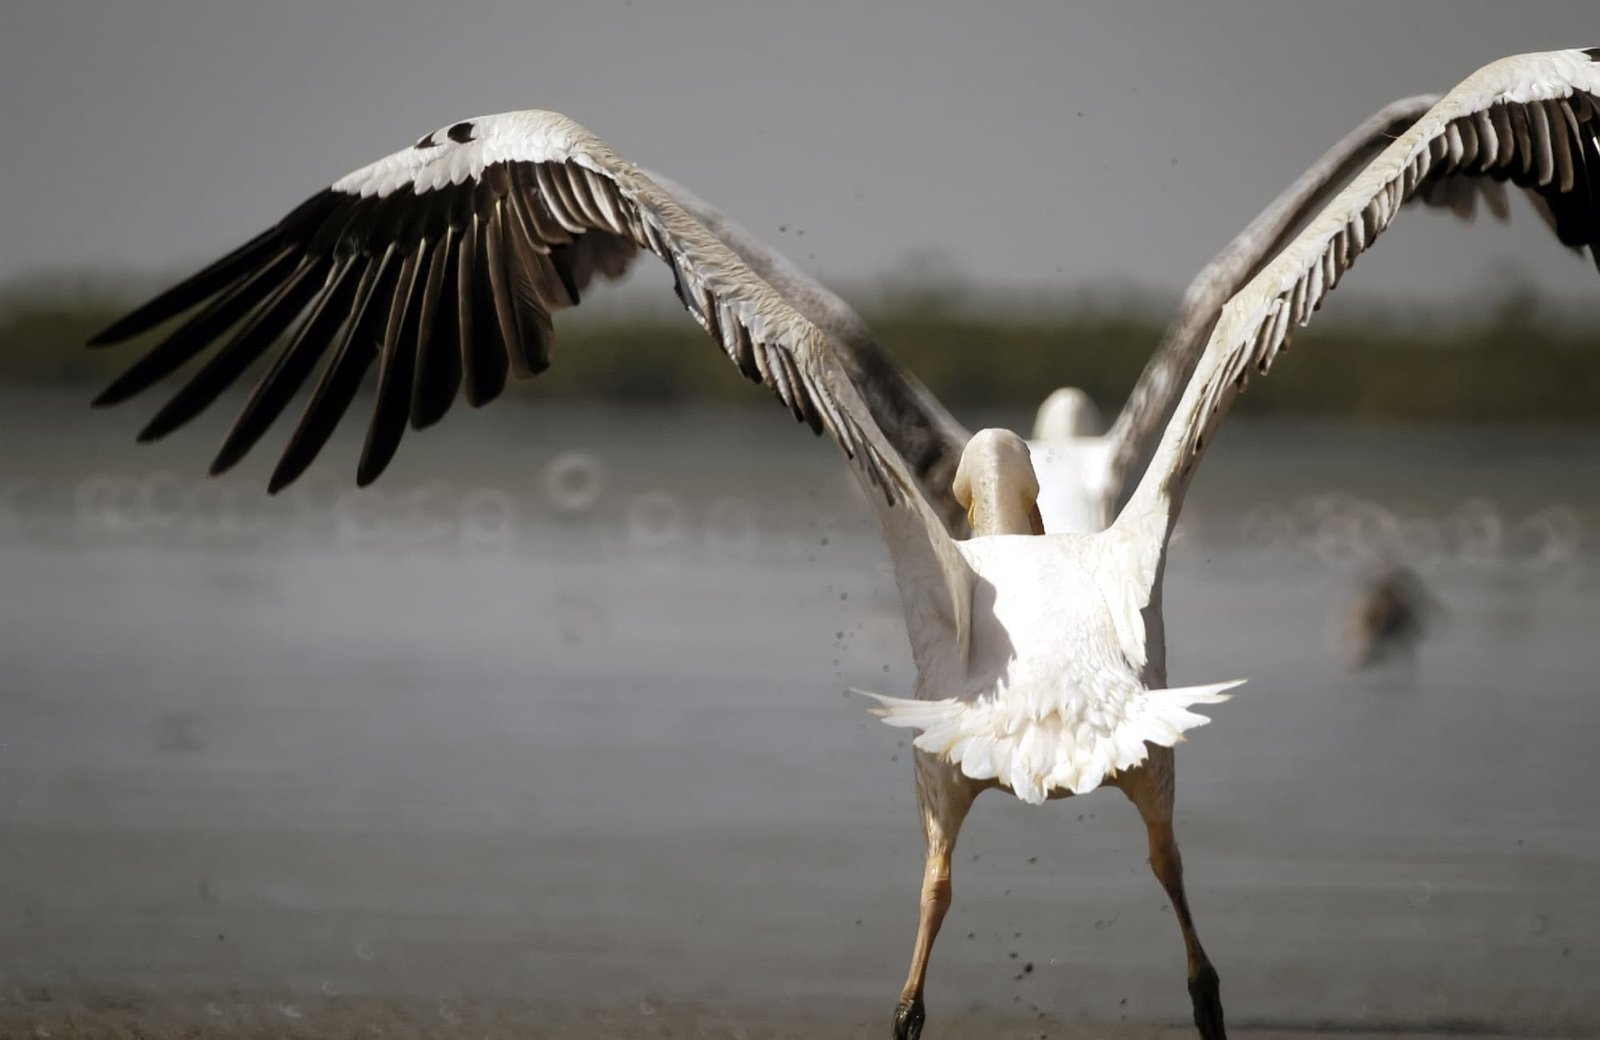 Casamance excursions by pirogue hotel Cap Skirring Senegal The Papayer Ecolodge birds and pelicans